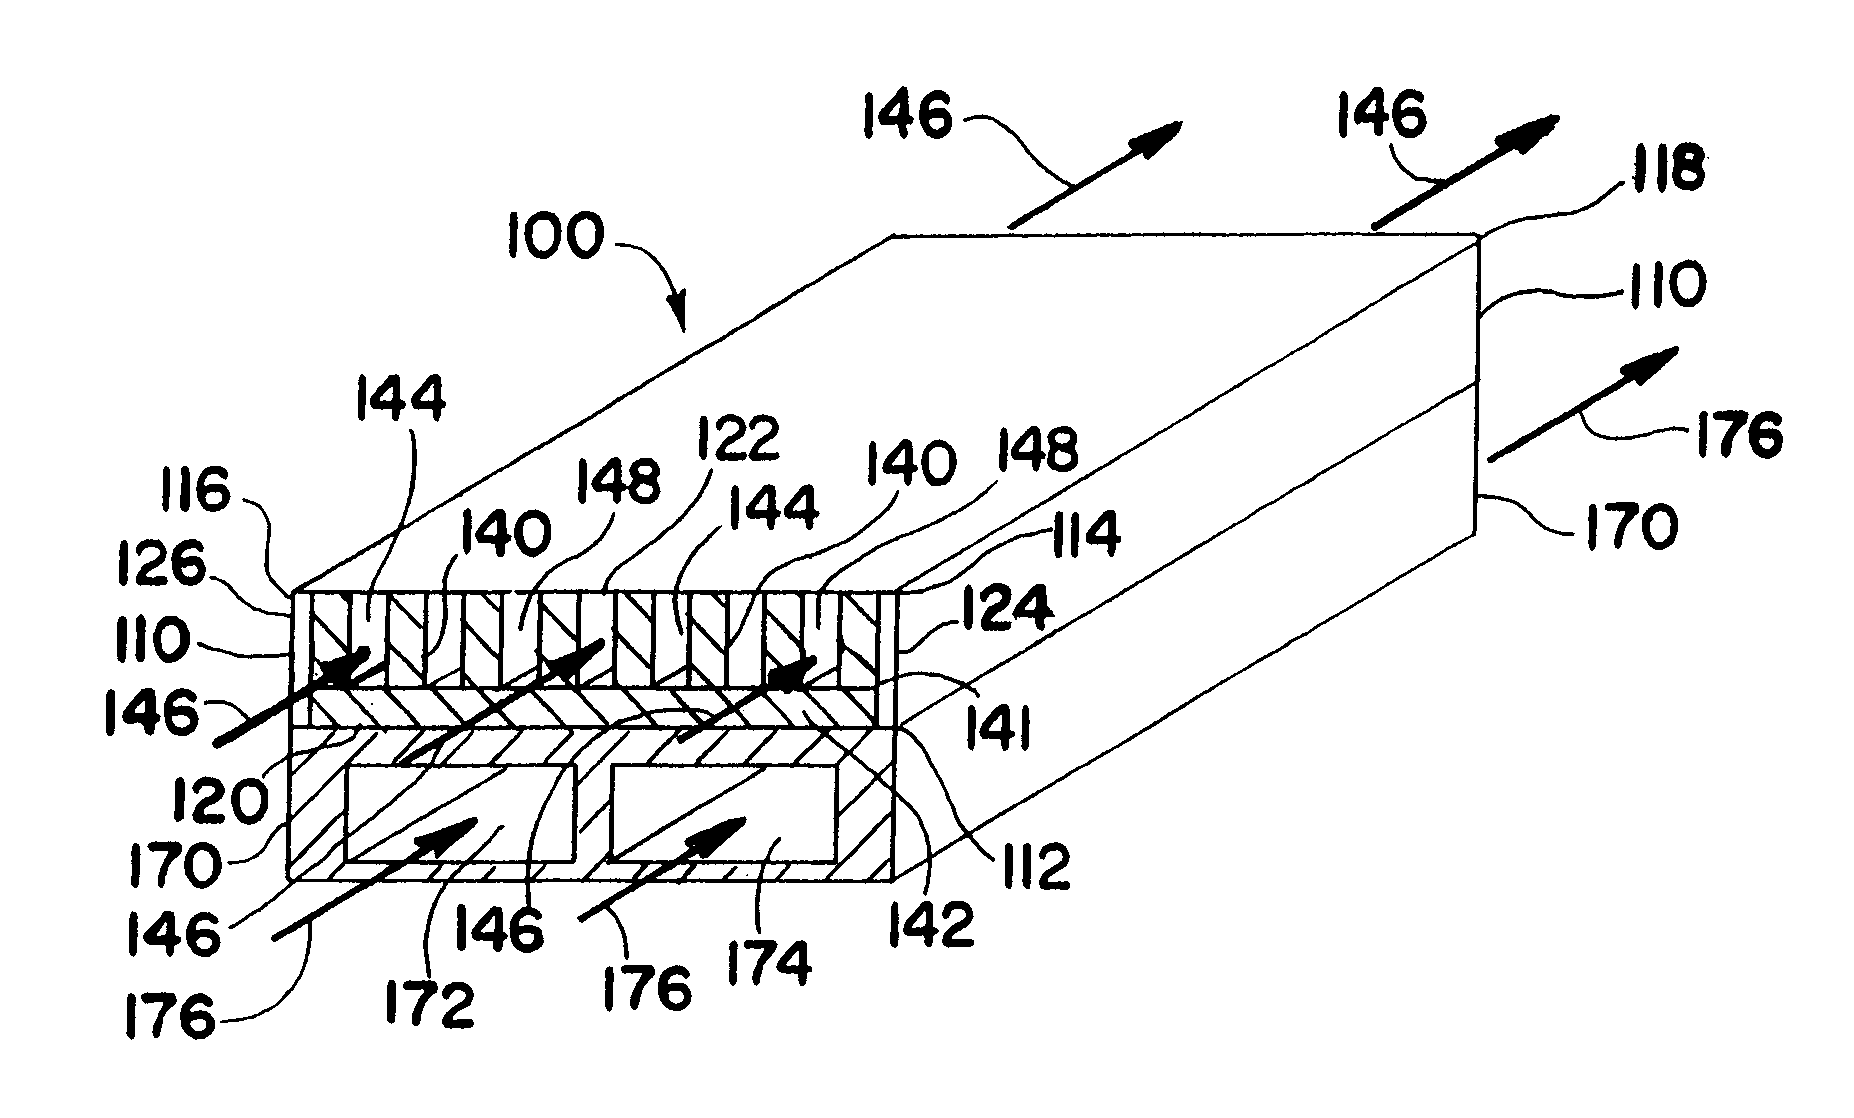 Microchannel with internal fin support for catalyst or sorption medium